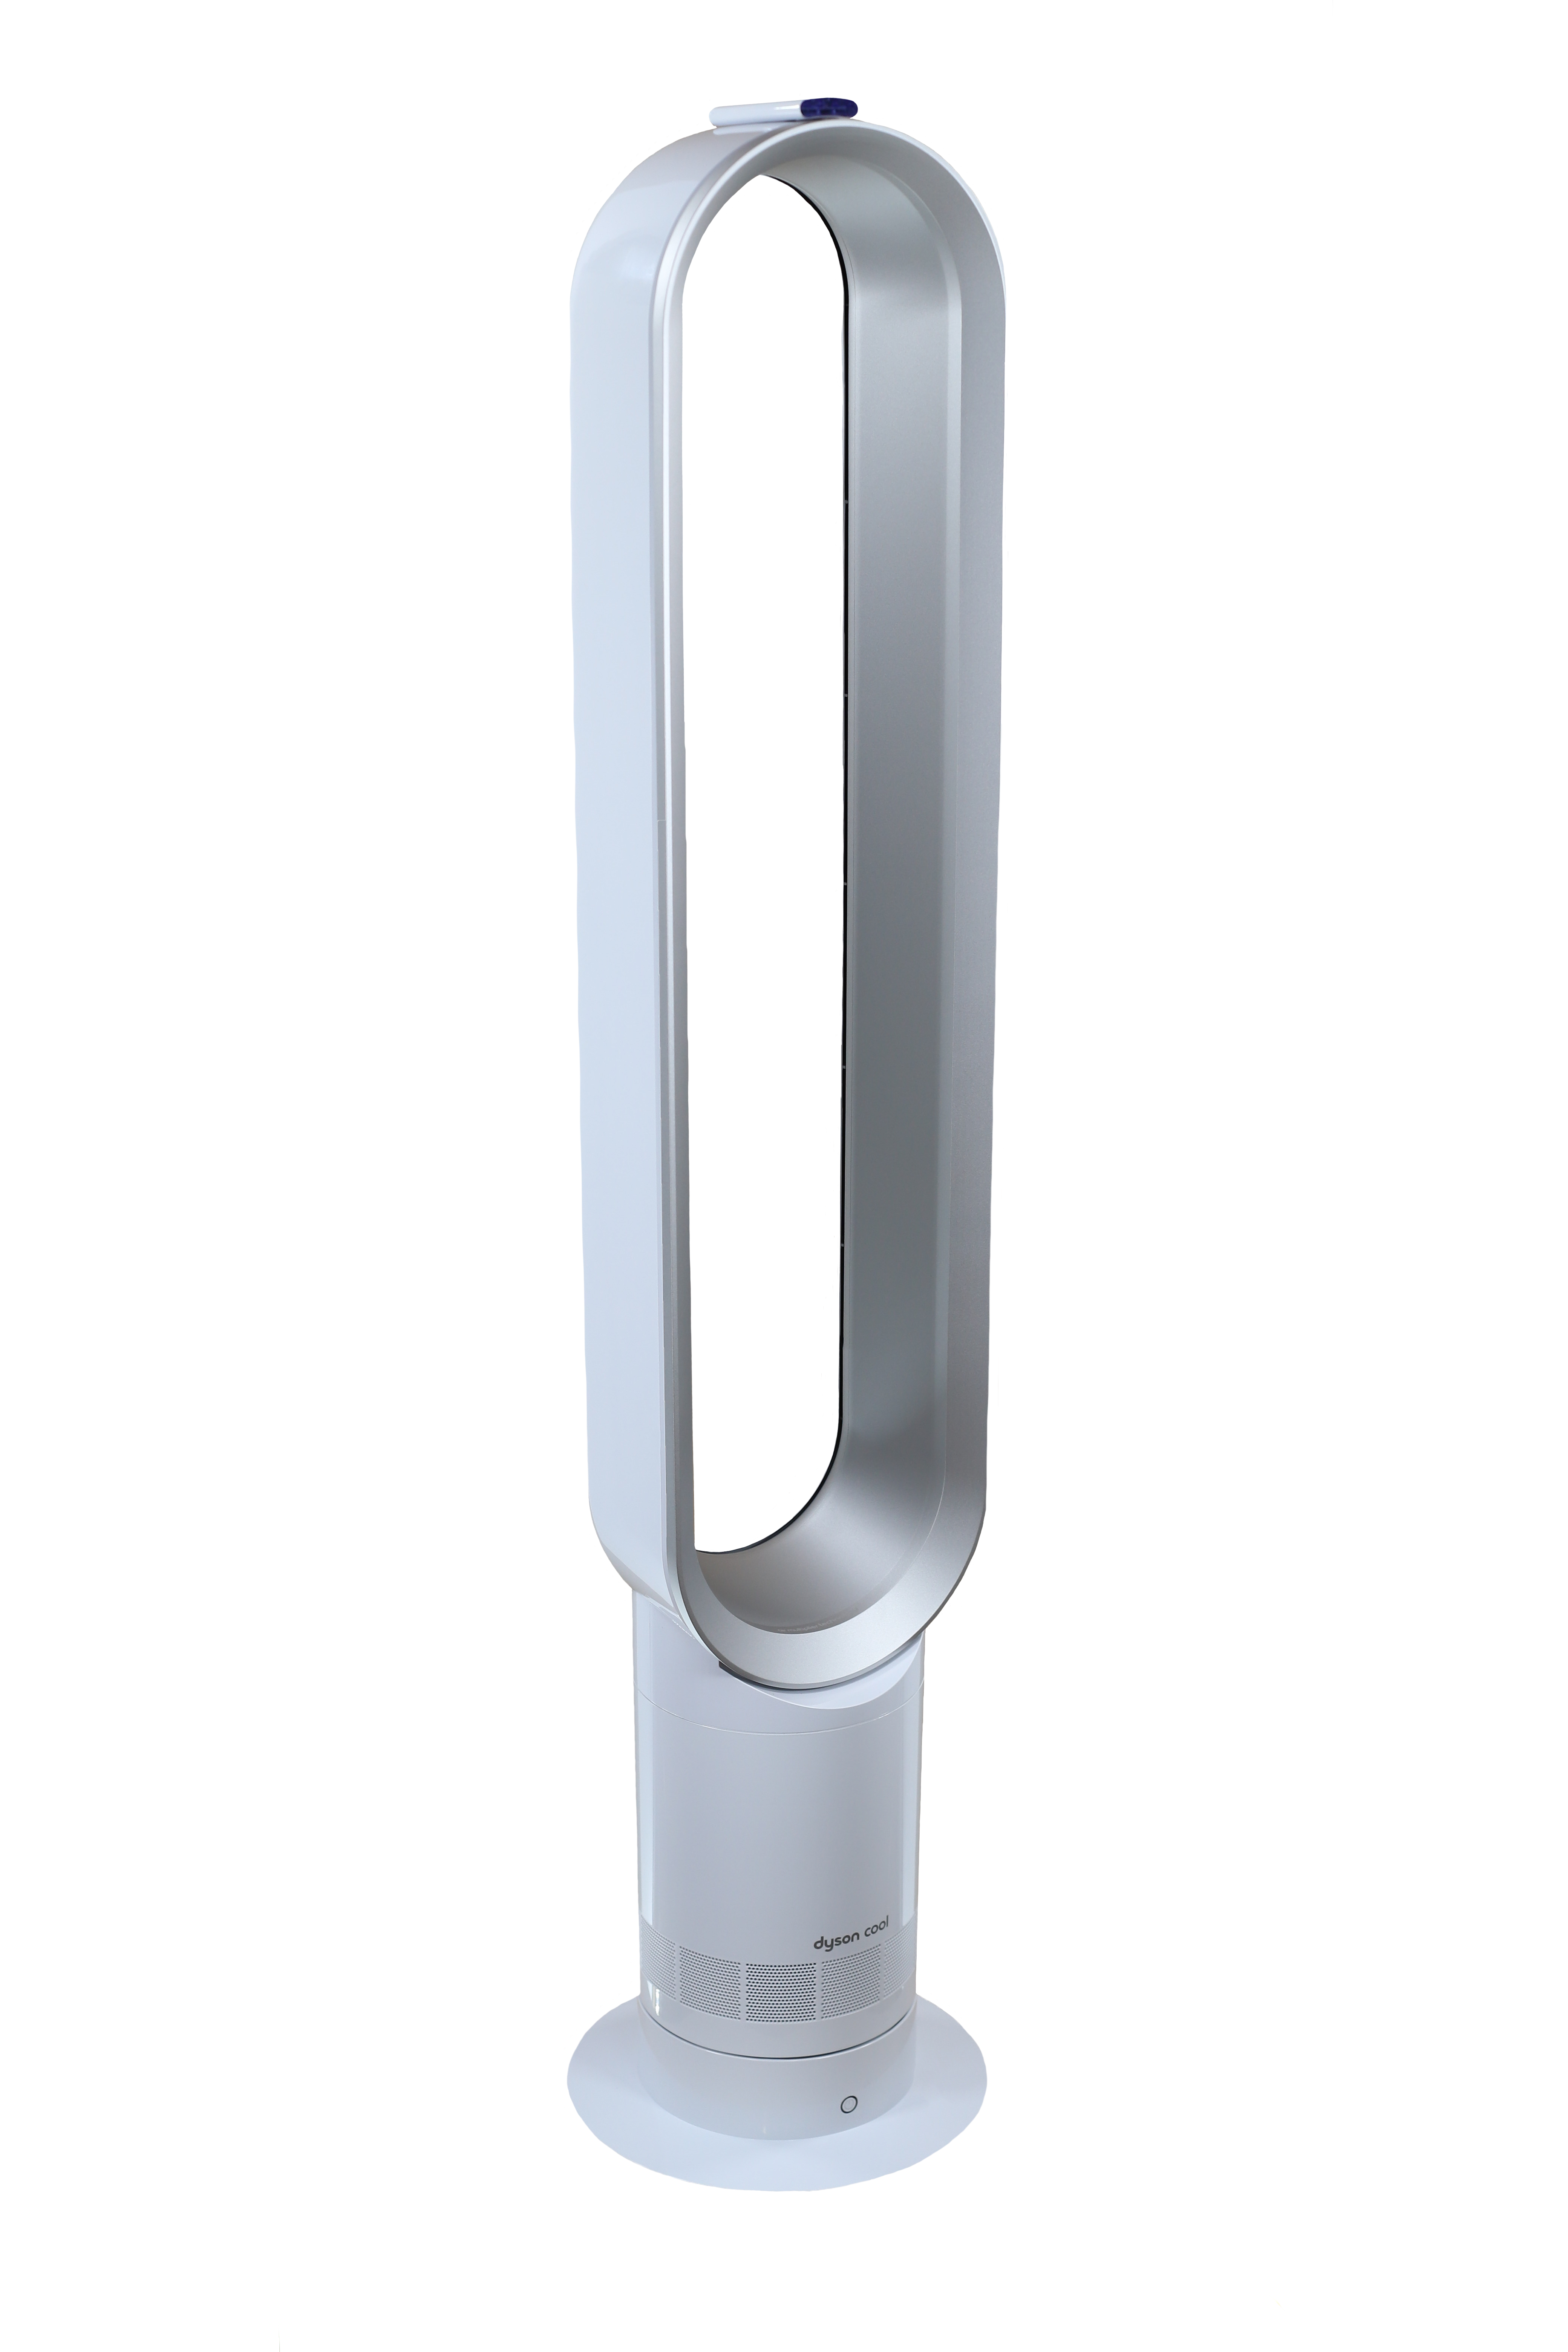 Dyson Cool Tower Fan from €12.90 per month